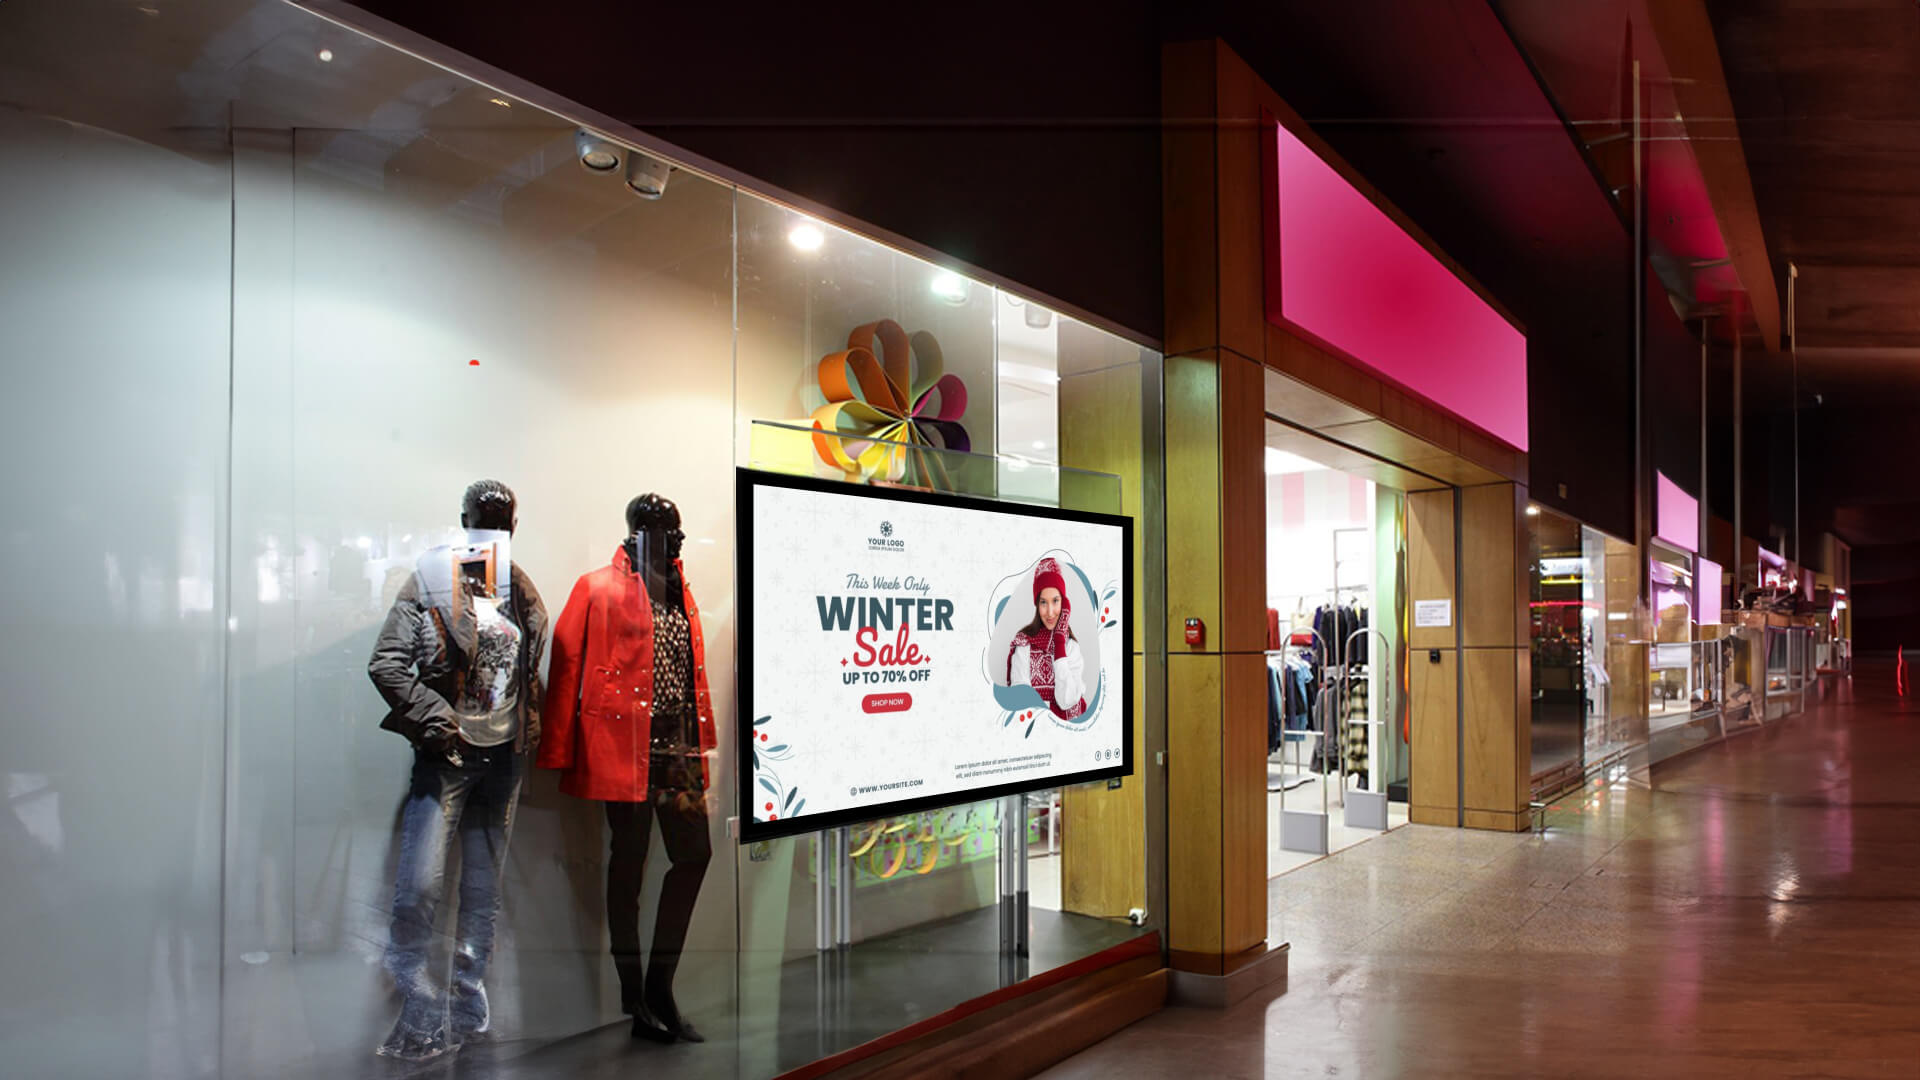 Digital signage screens used for showing winter fashion discounts outside stores.